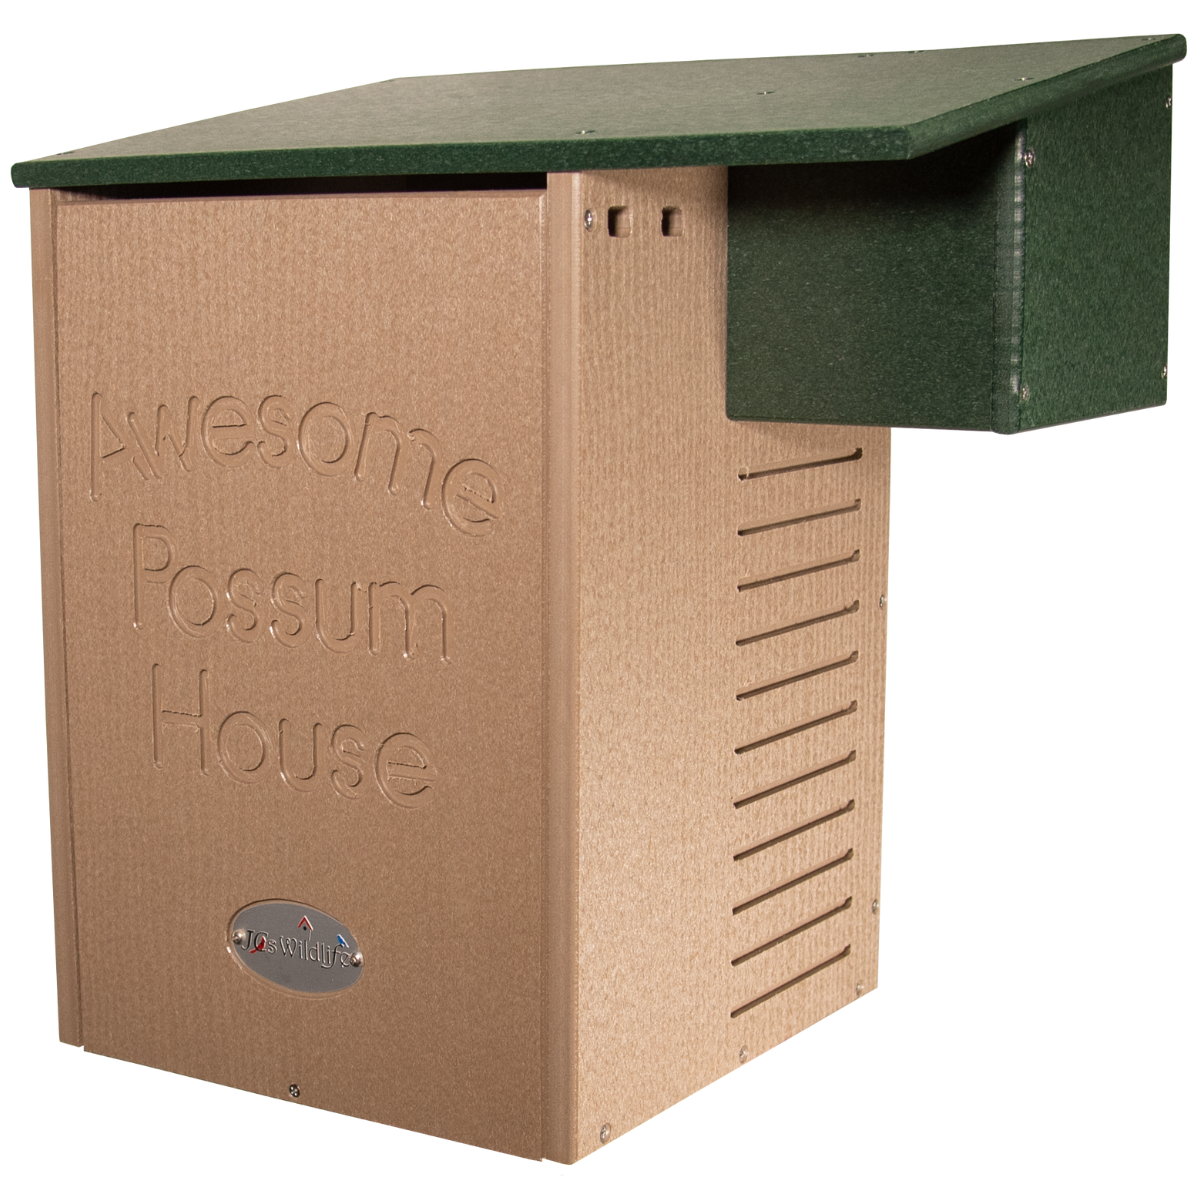 JCS Wildlife Recycled Poly Lumber Awesome Possum House